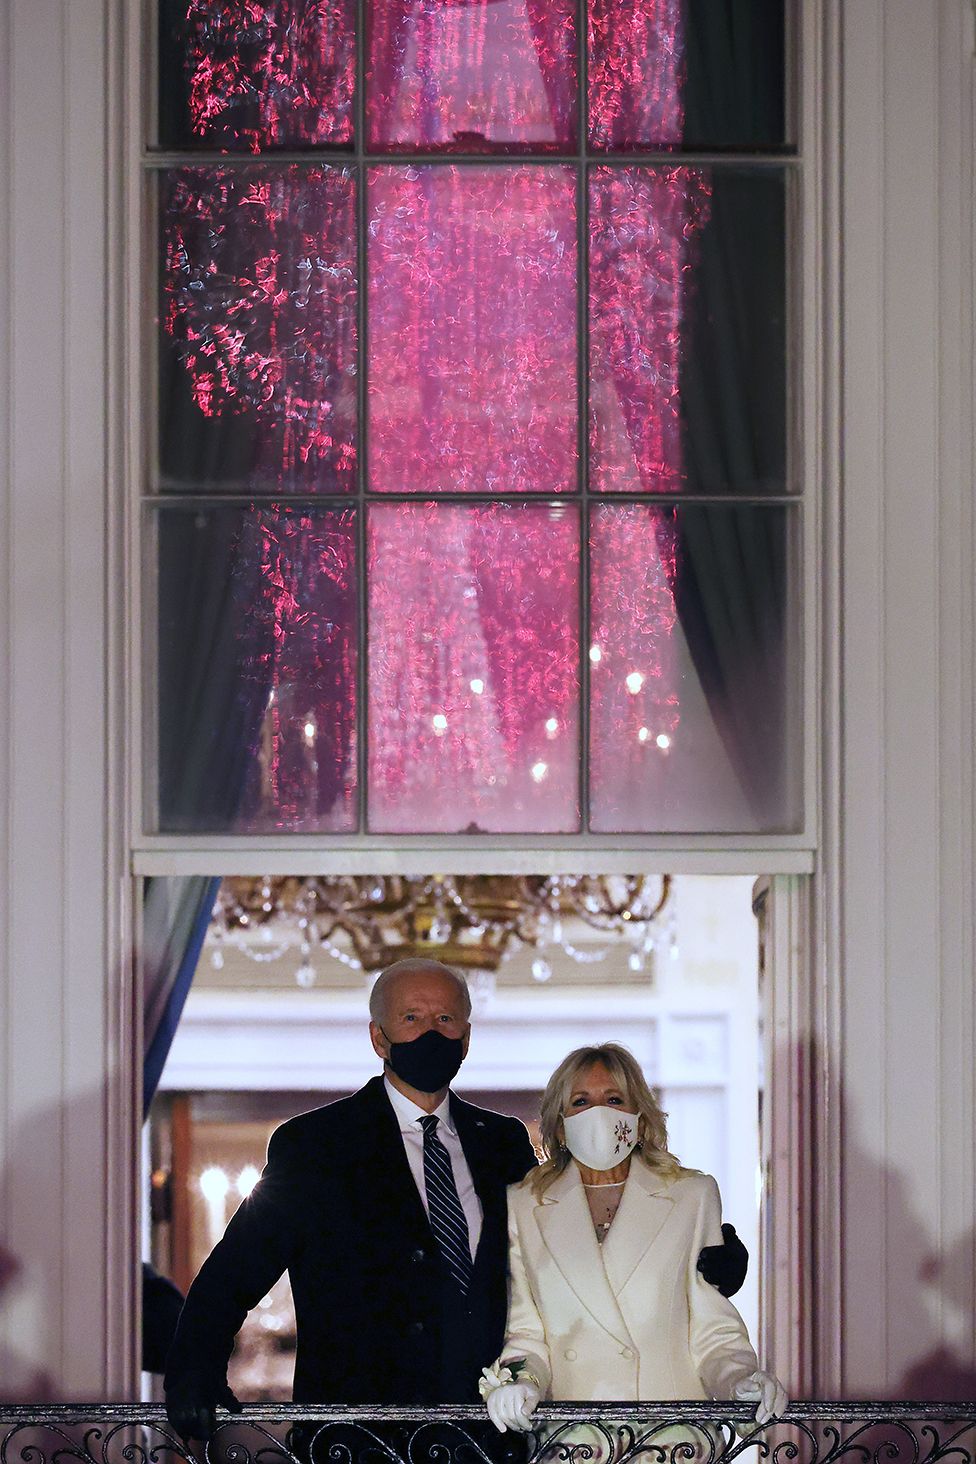 US President Joe Biden and First Lady Jill Biden watch a fireworks show on the National Mall from the Truman Balcony at the White House, 20 January 2021 in Washington